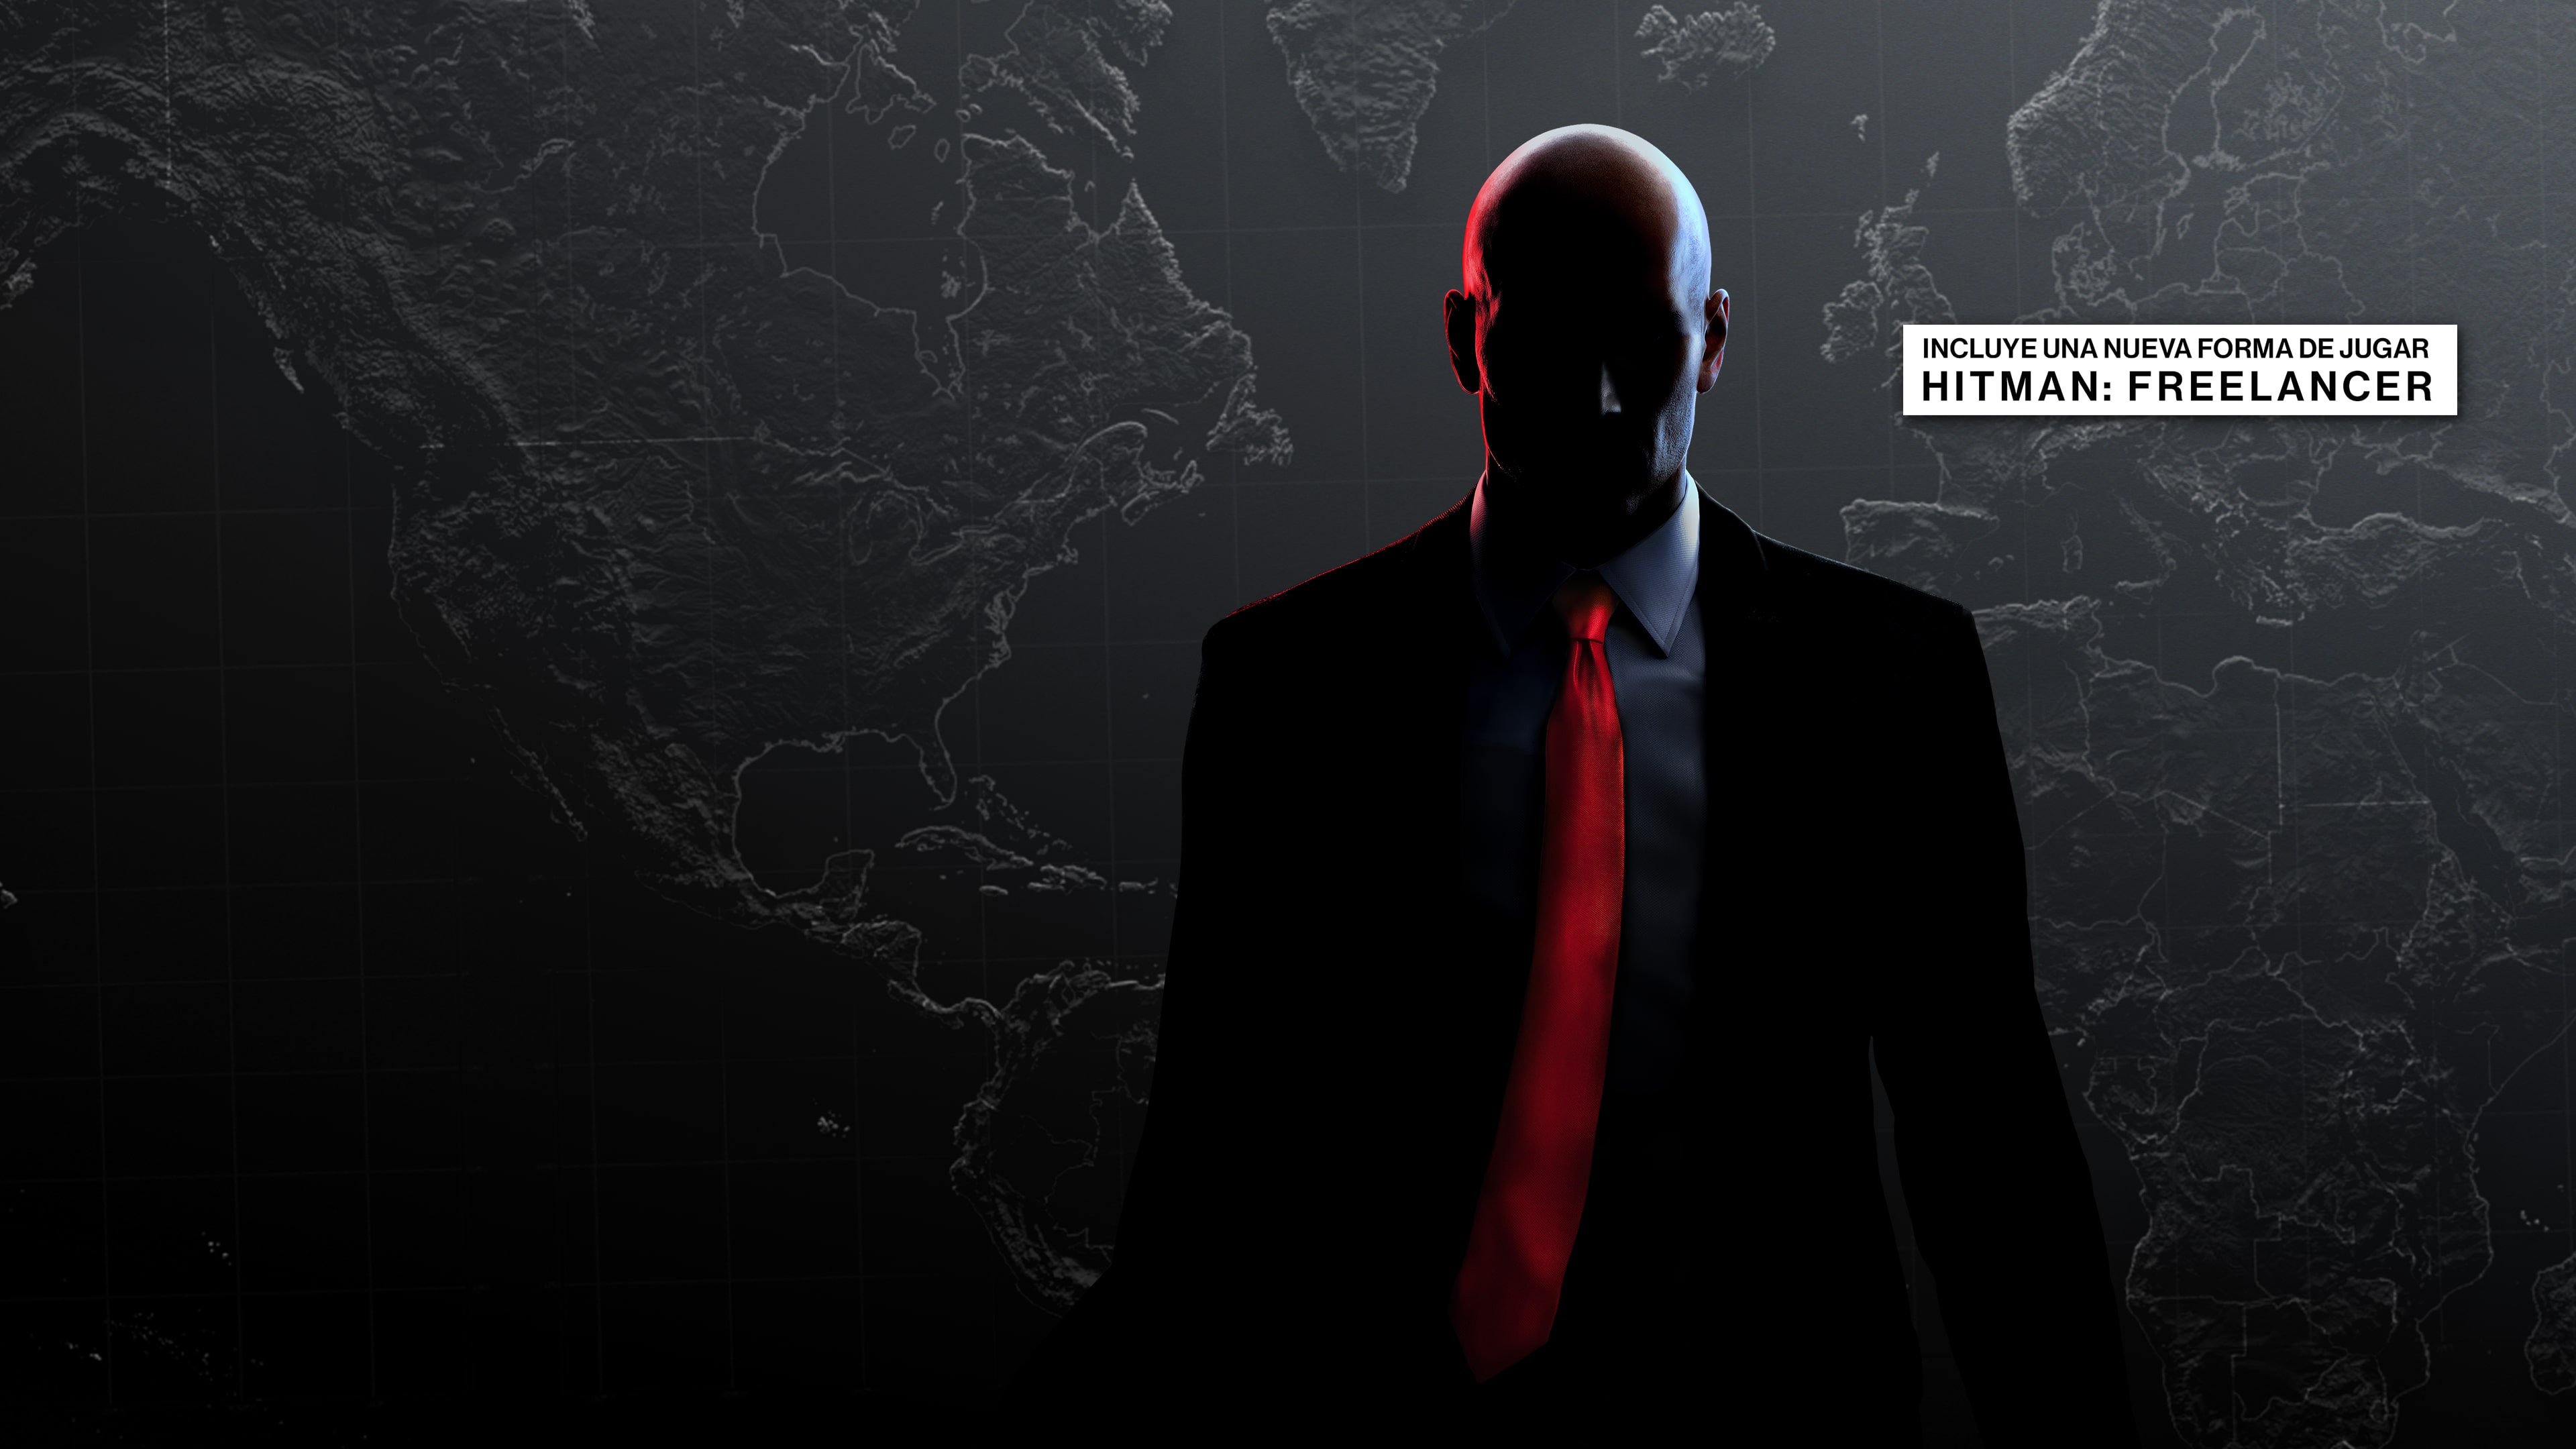 instal the last version for iphoneHITMAN World of Assassination